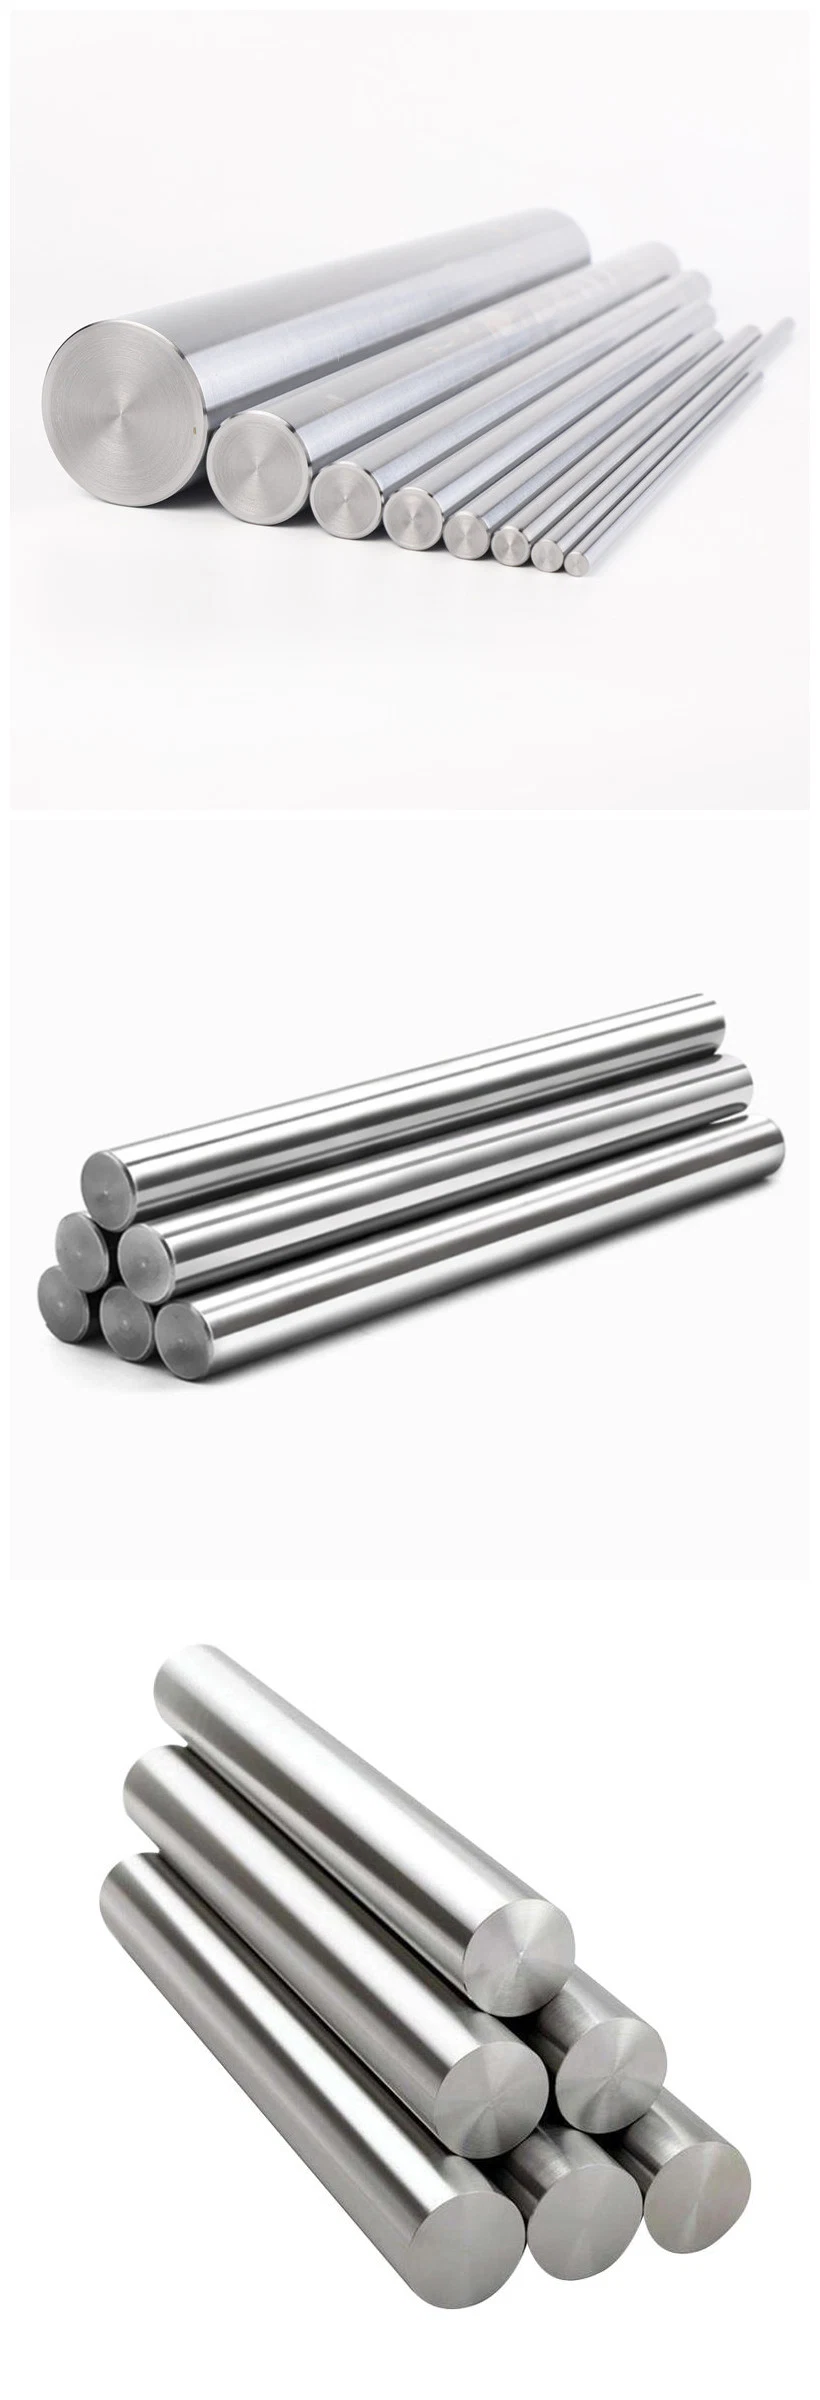 China Factory of Bearing Steel Rod Chromed Linear Shaft (3-150mm)